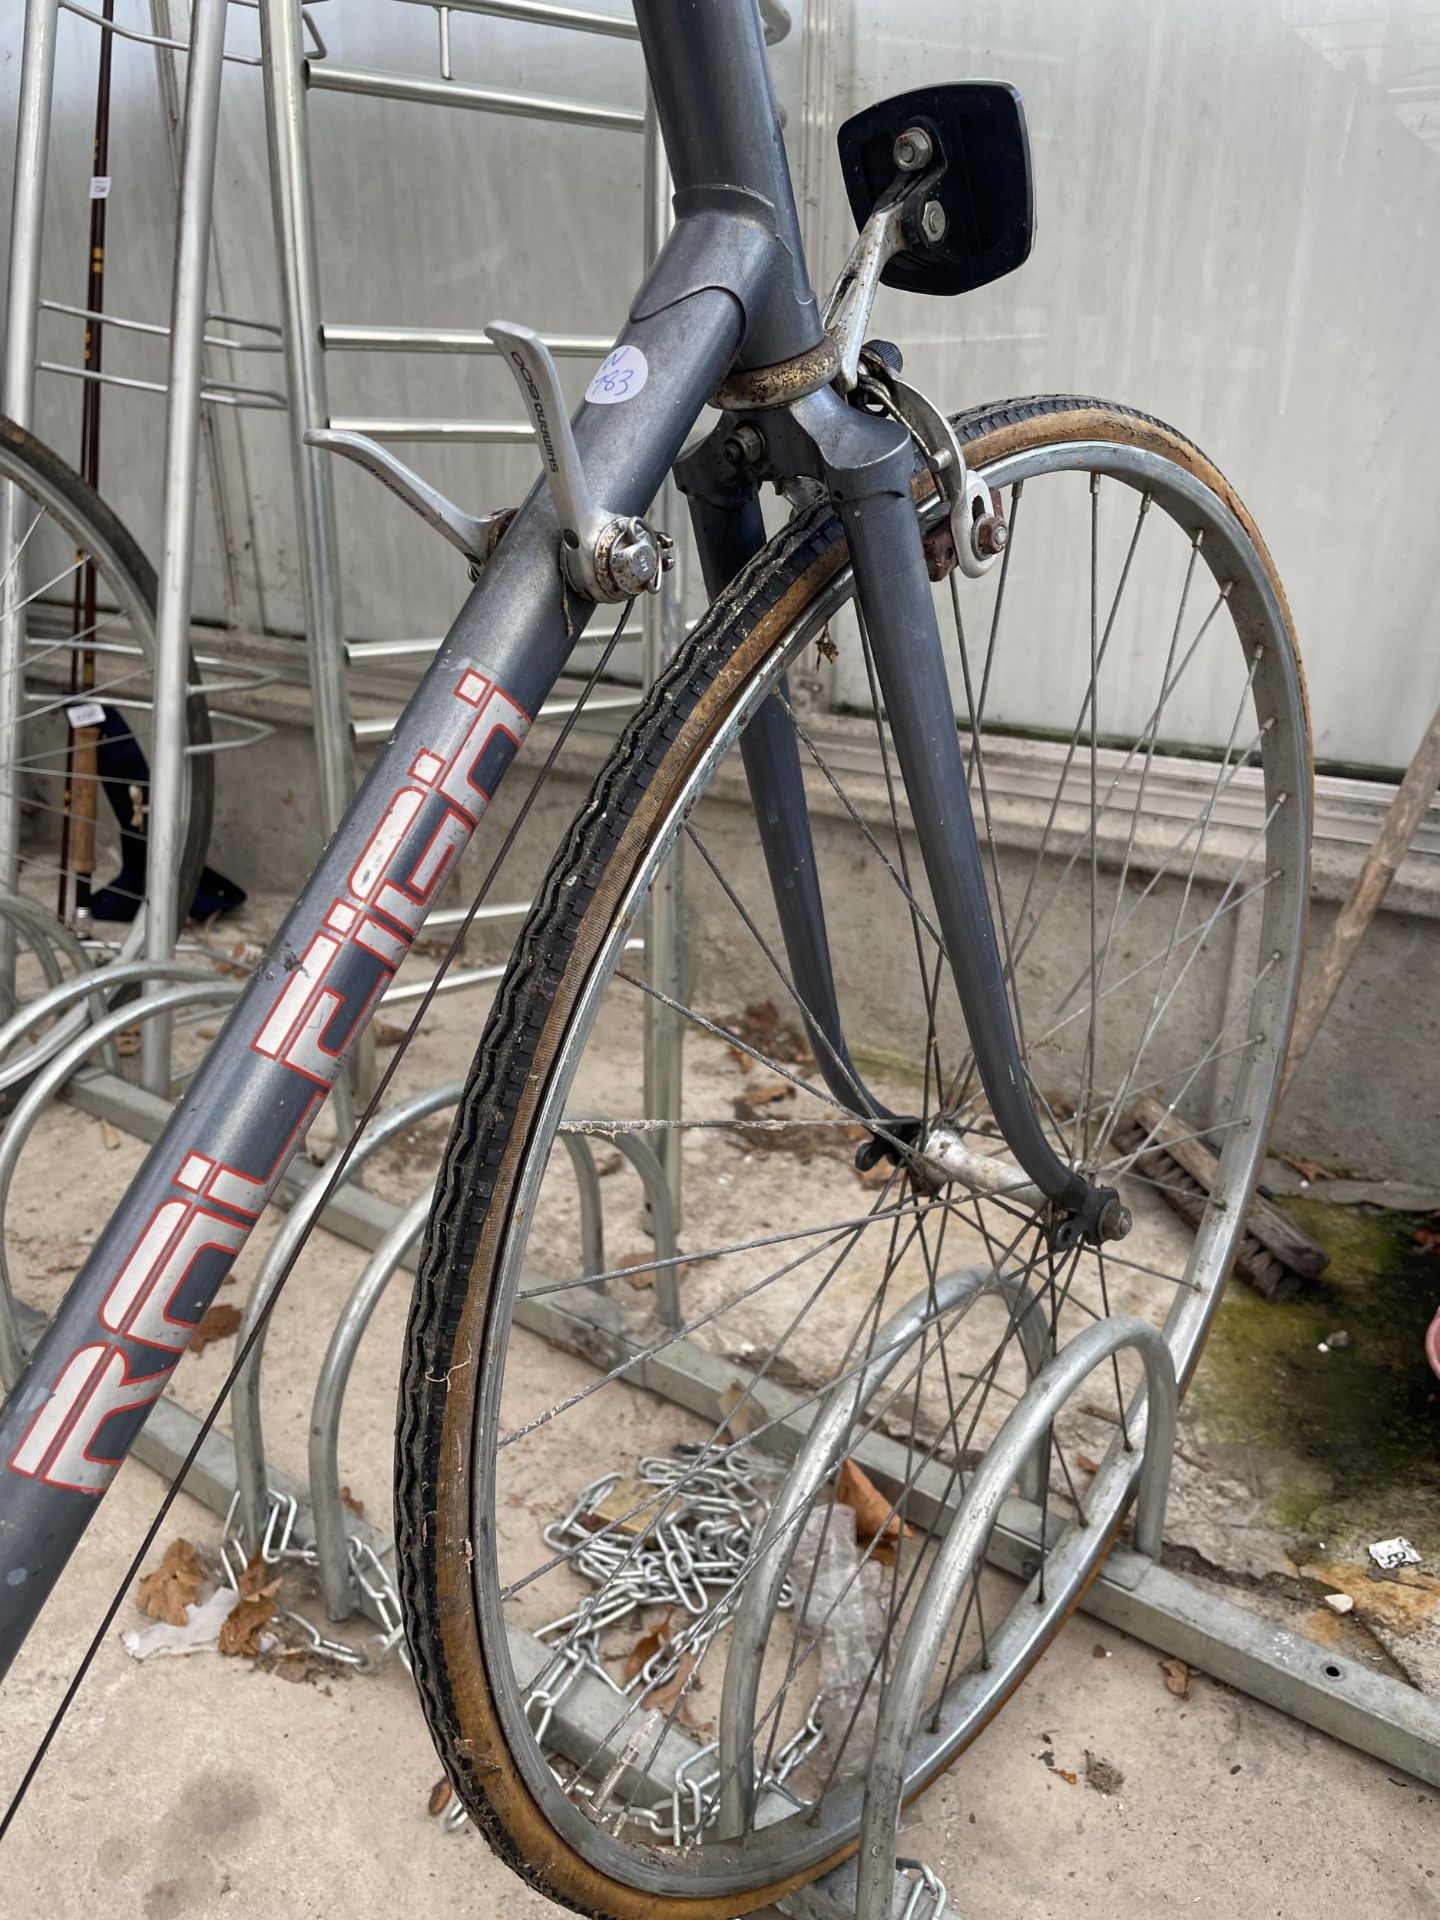 A GENTS RALEIGH PULSAR ROAD BIKE WITH 10 SPEED GEAR SYSTEM - Image 3 of 3